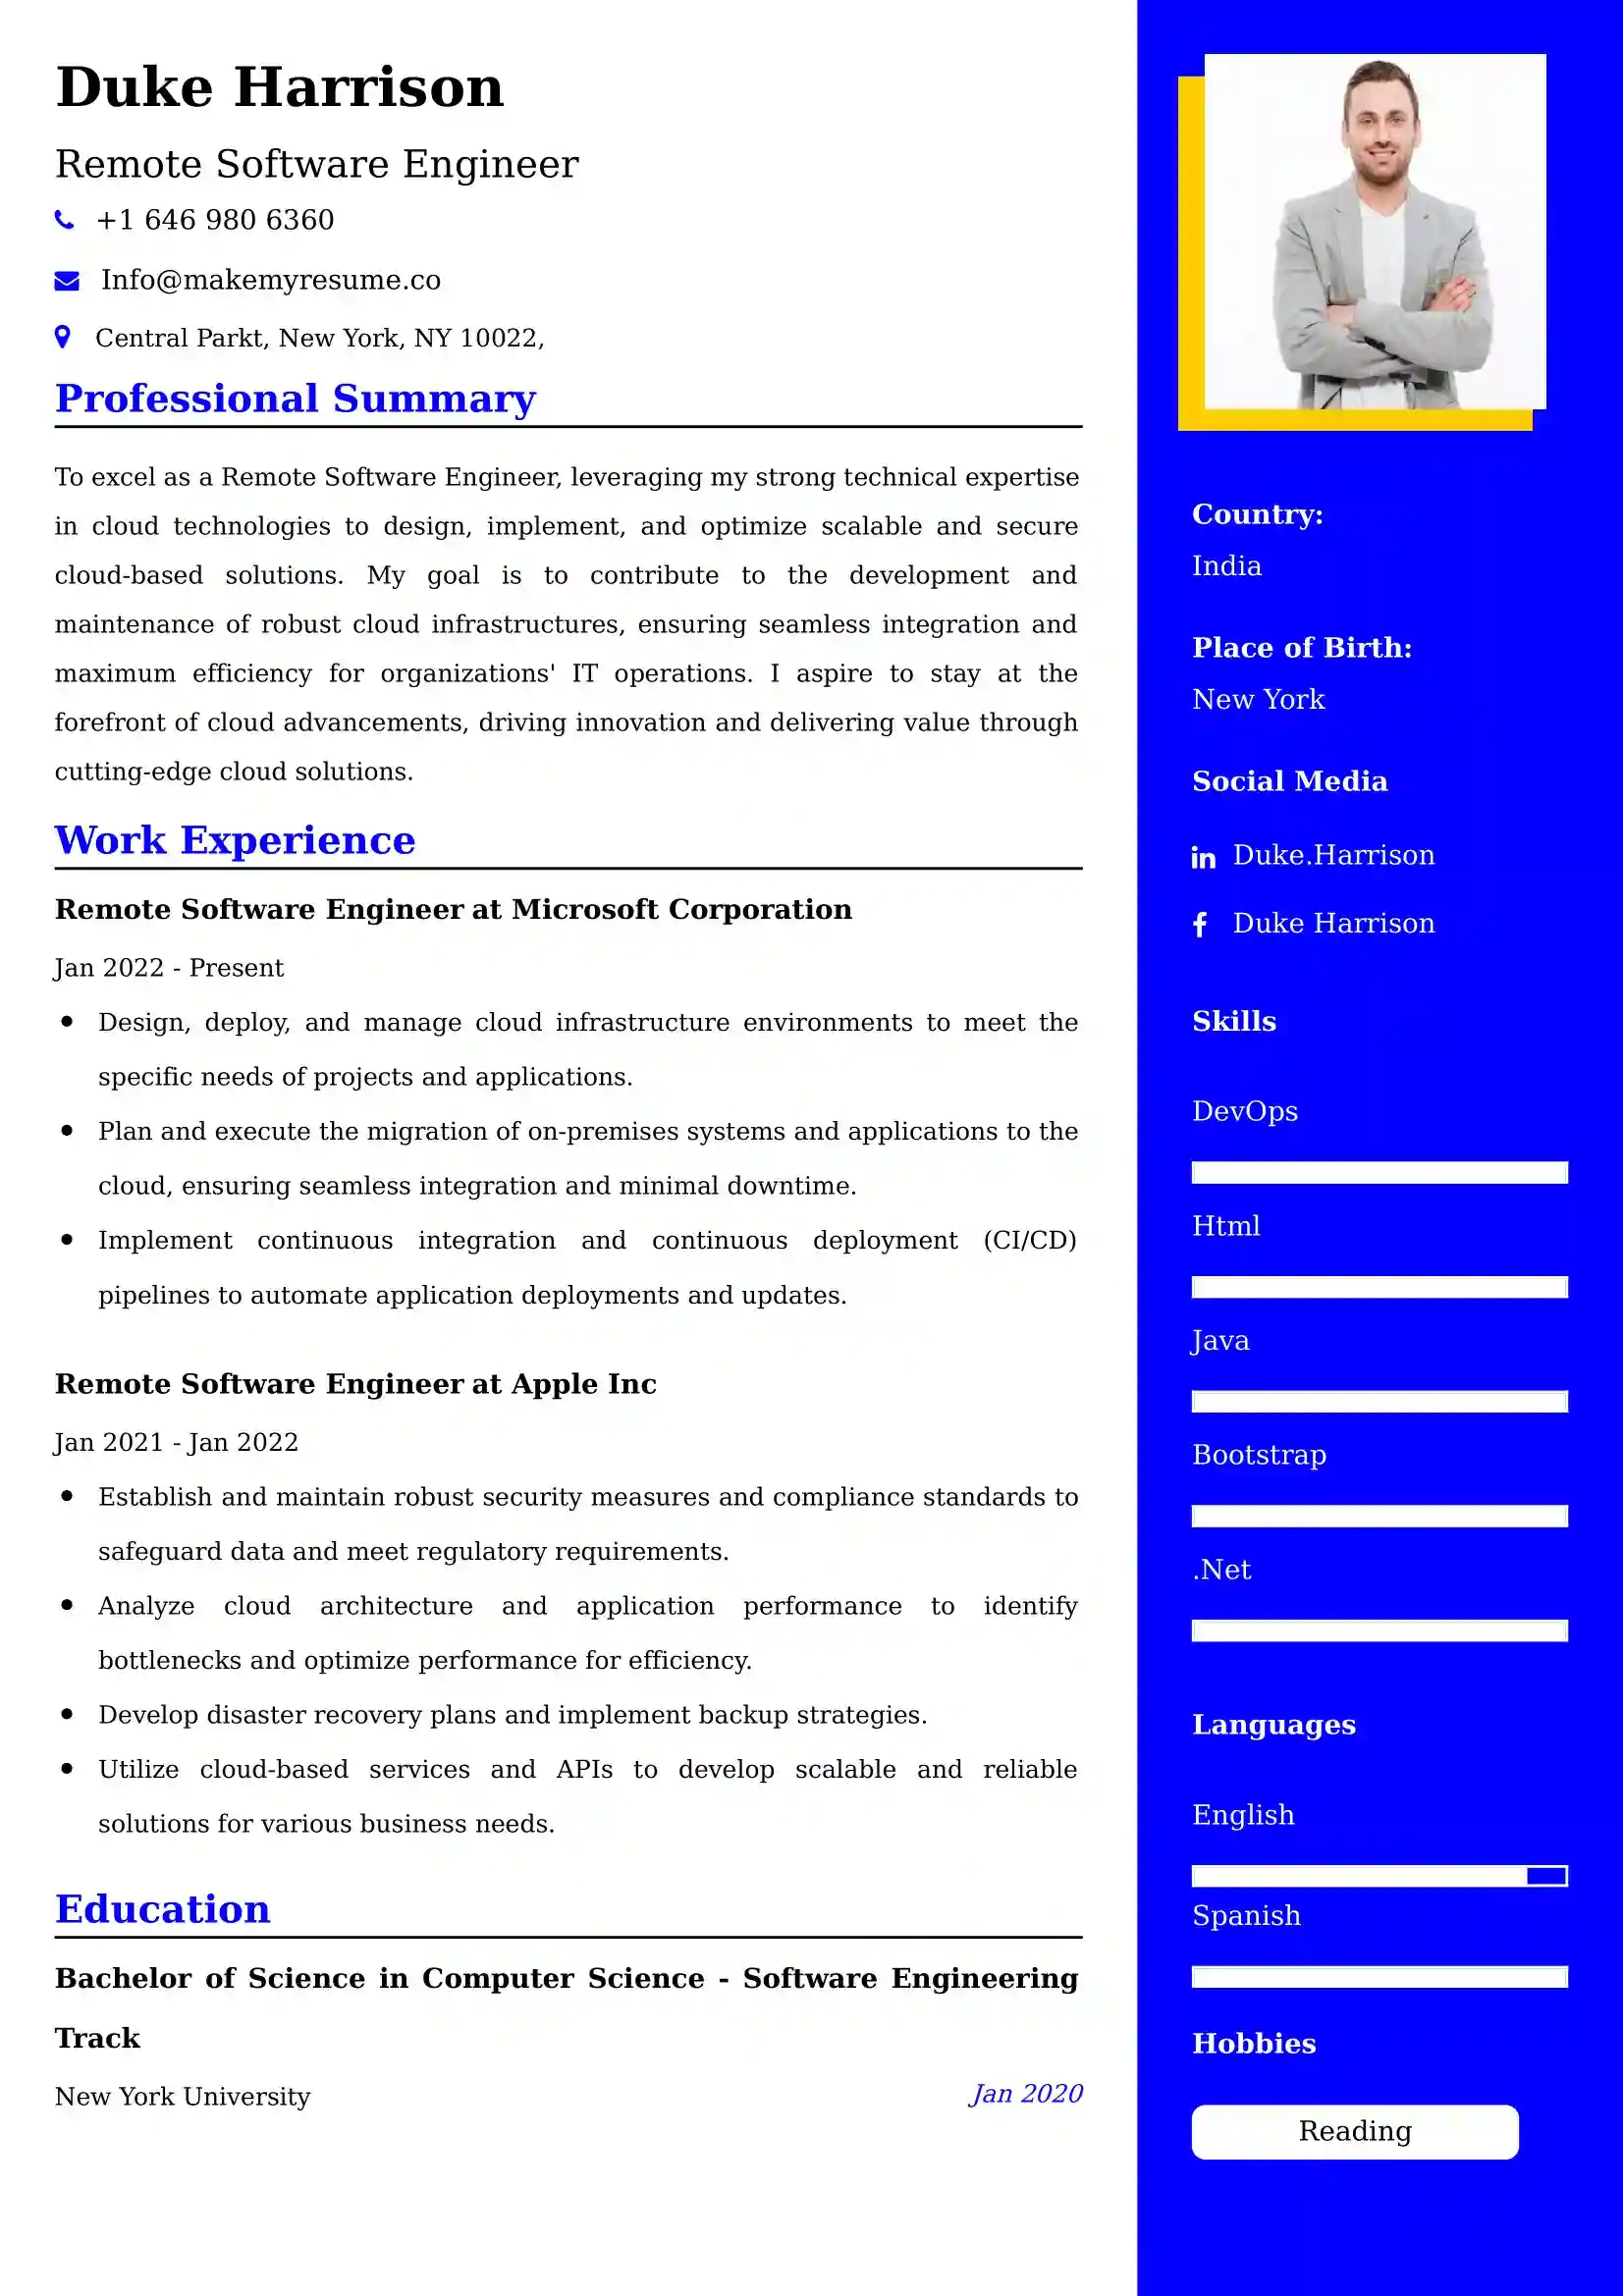 Remote Software Engineer Resume Examples for UAE